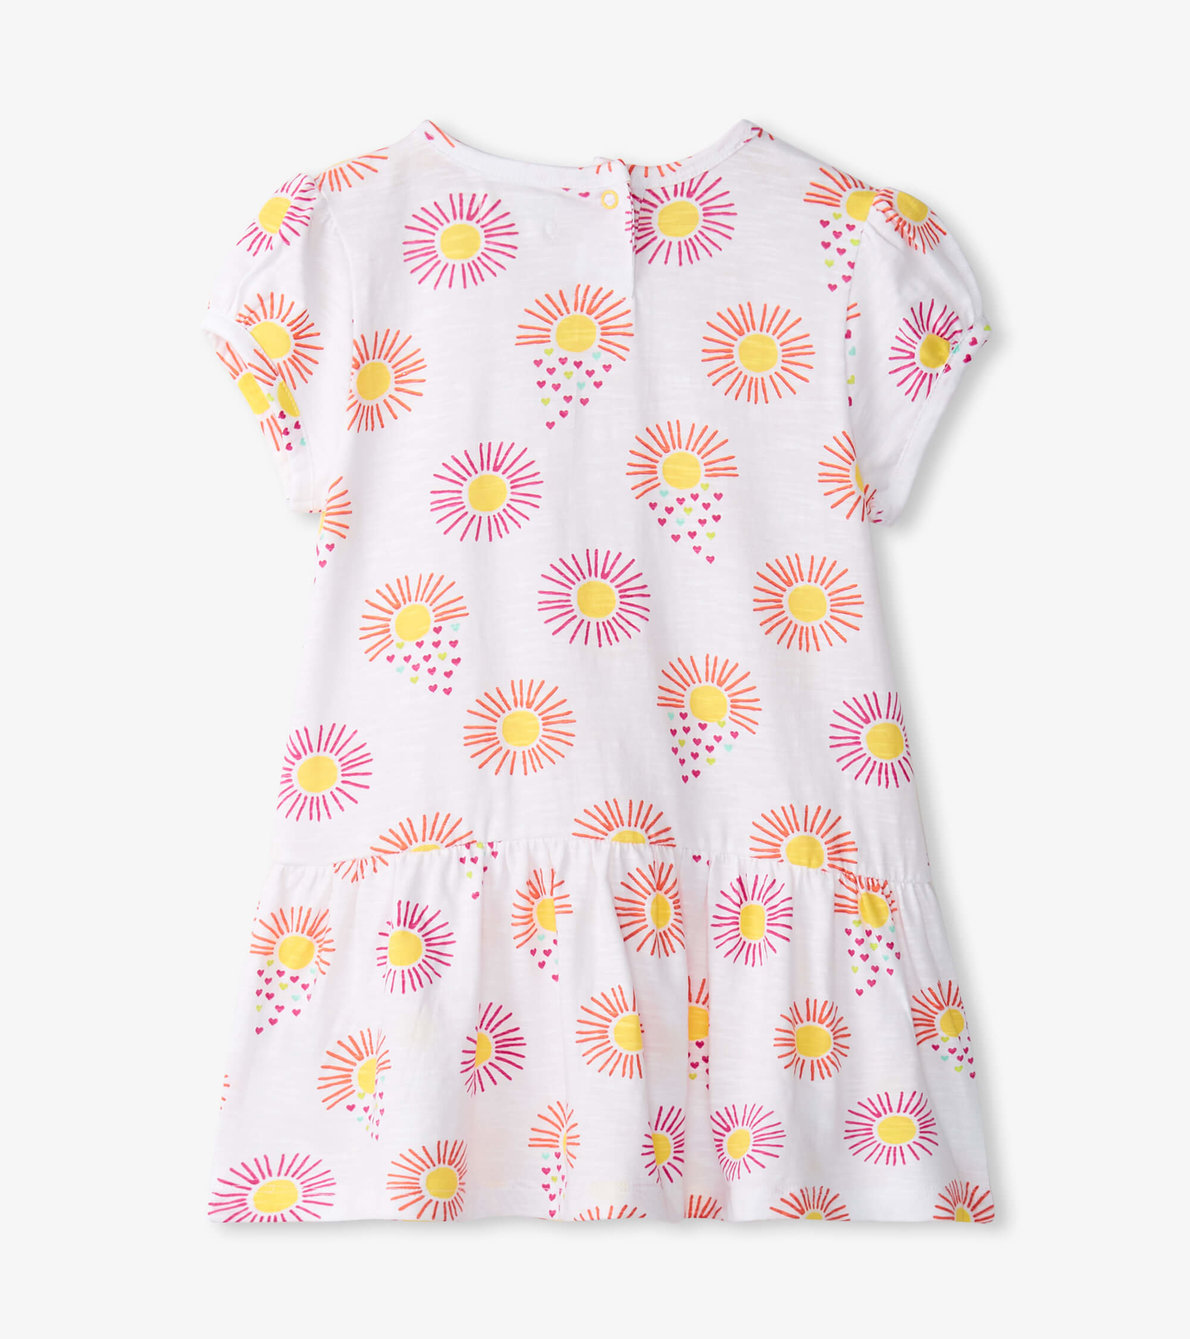 View larger image of Baby & Toddler Girls Heart Suns Gathered Dress